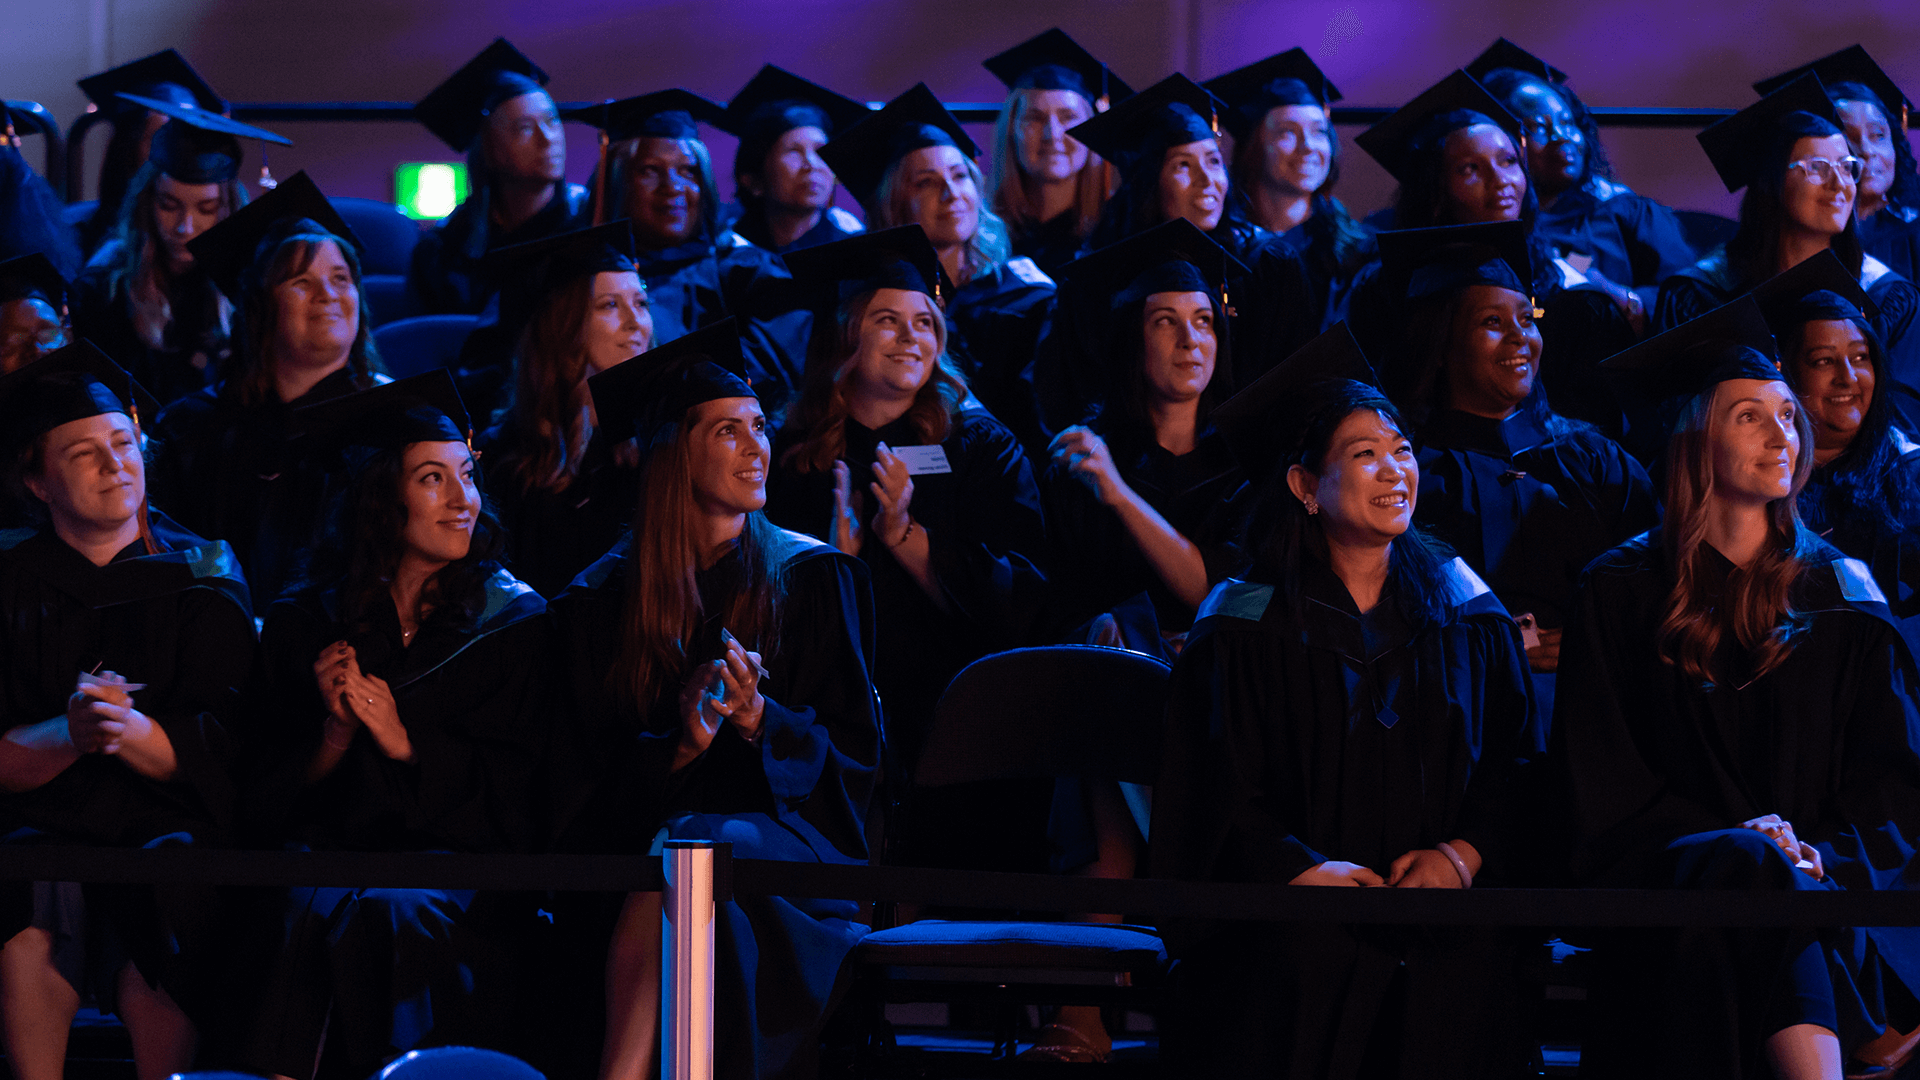 crowd shot of a group of graduates during the ceremony